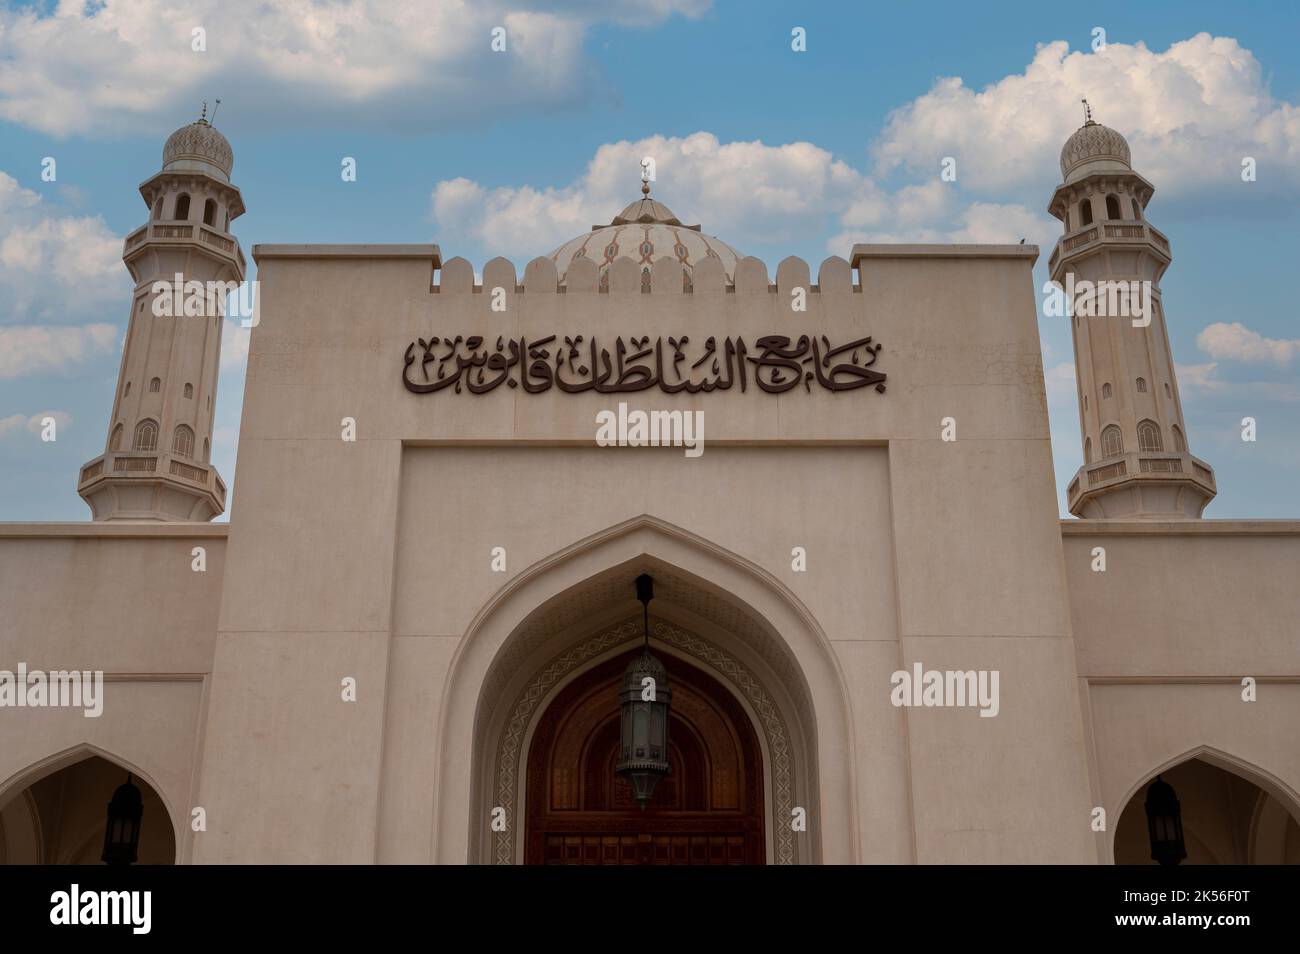 Sultan Qaboos mosque in the centre of Salalah, Oman Stock Photo